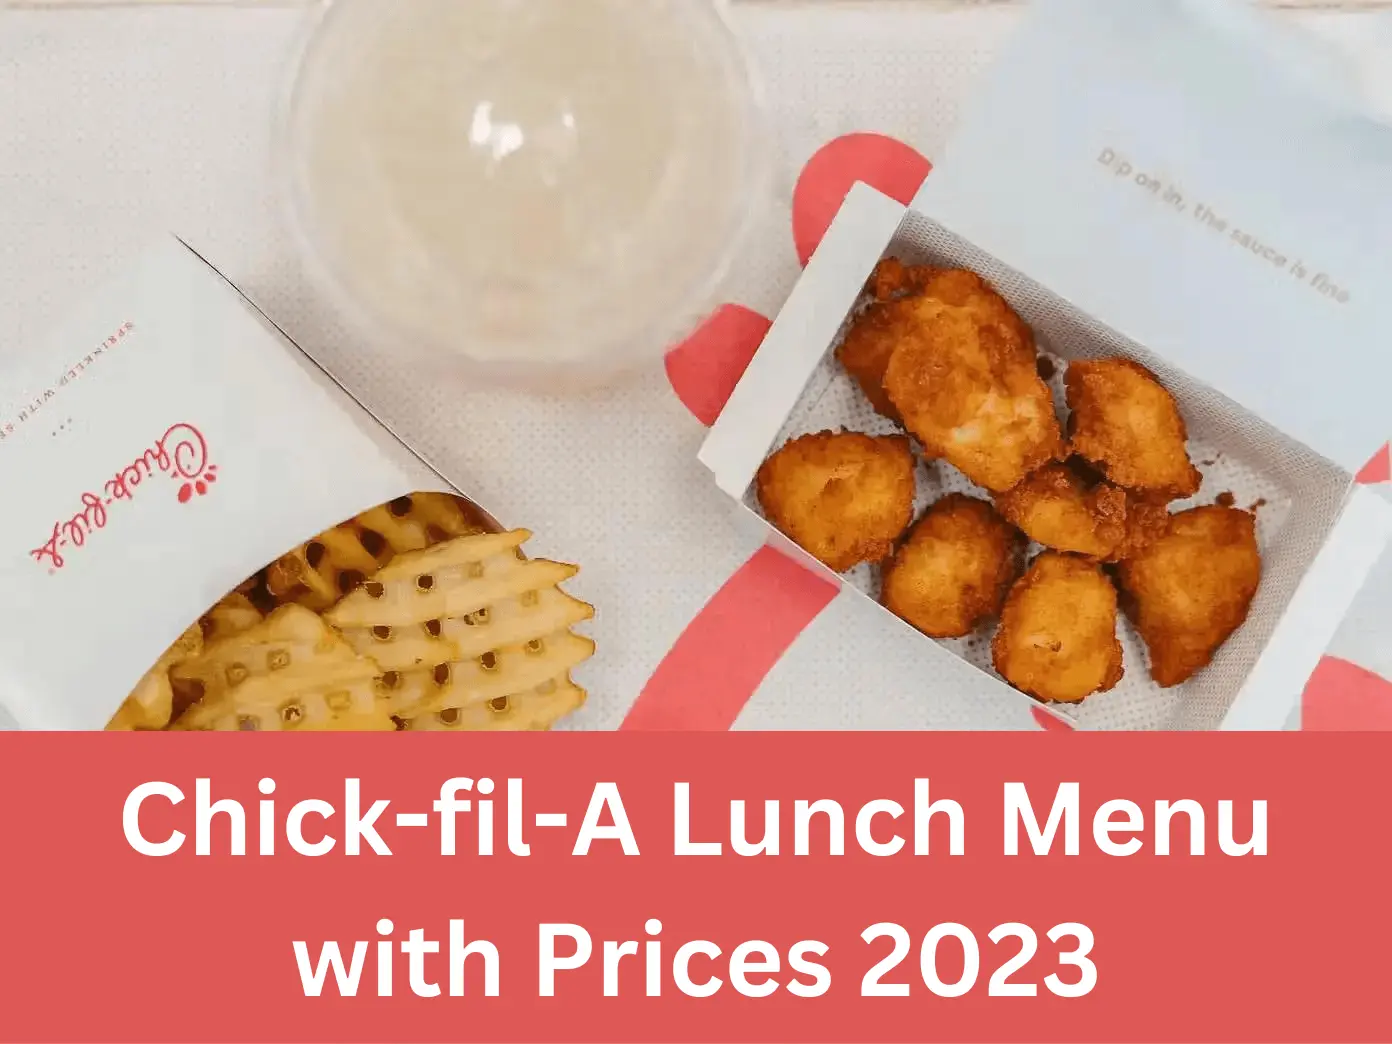 Chick-fil-A Menu with Prices